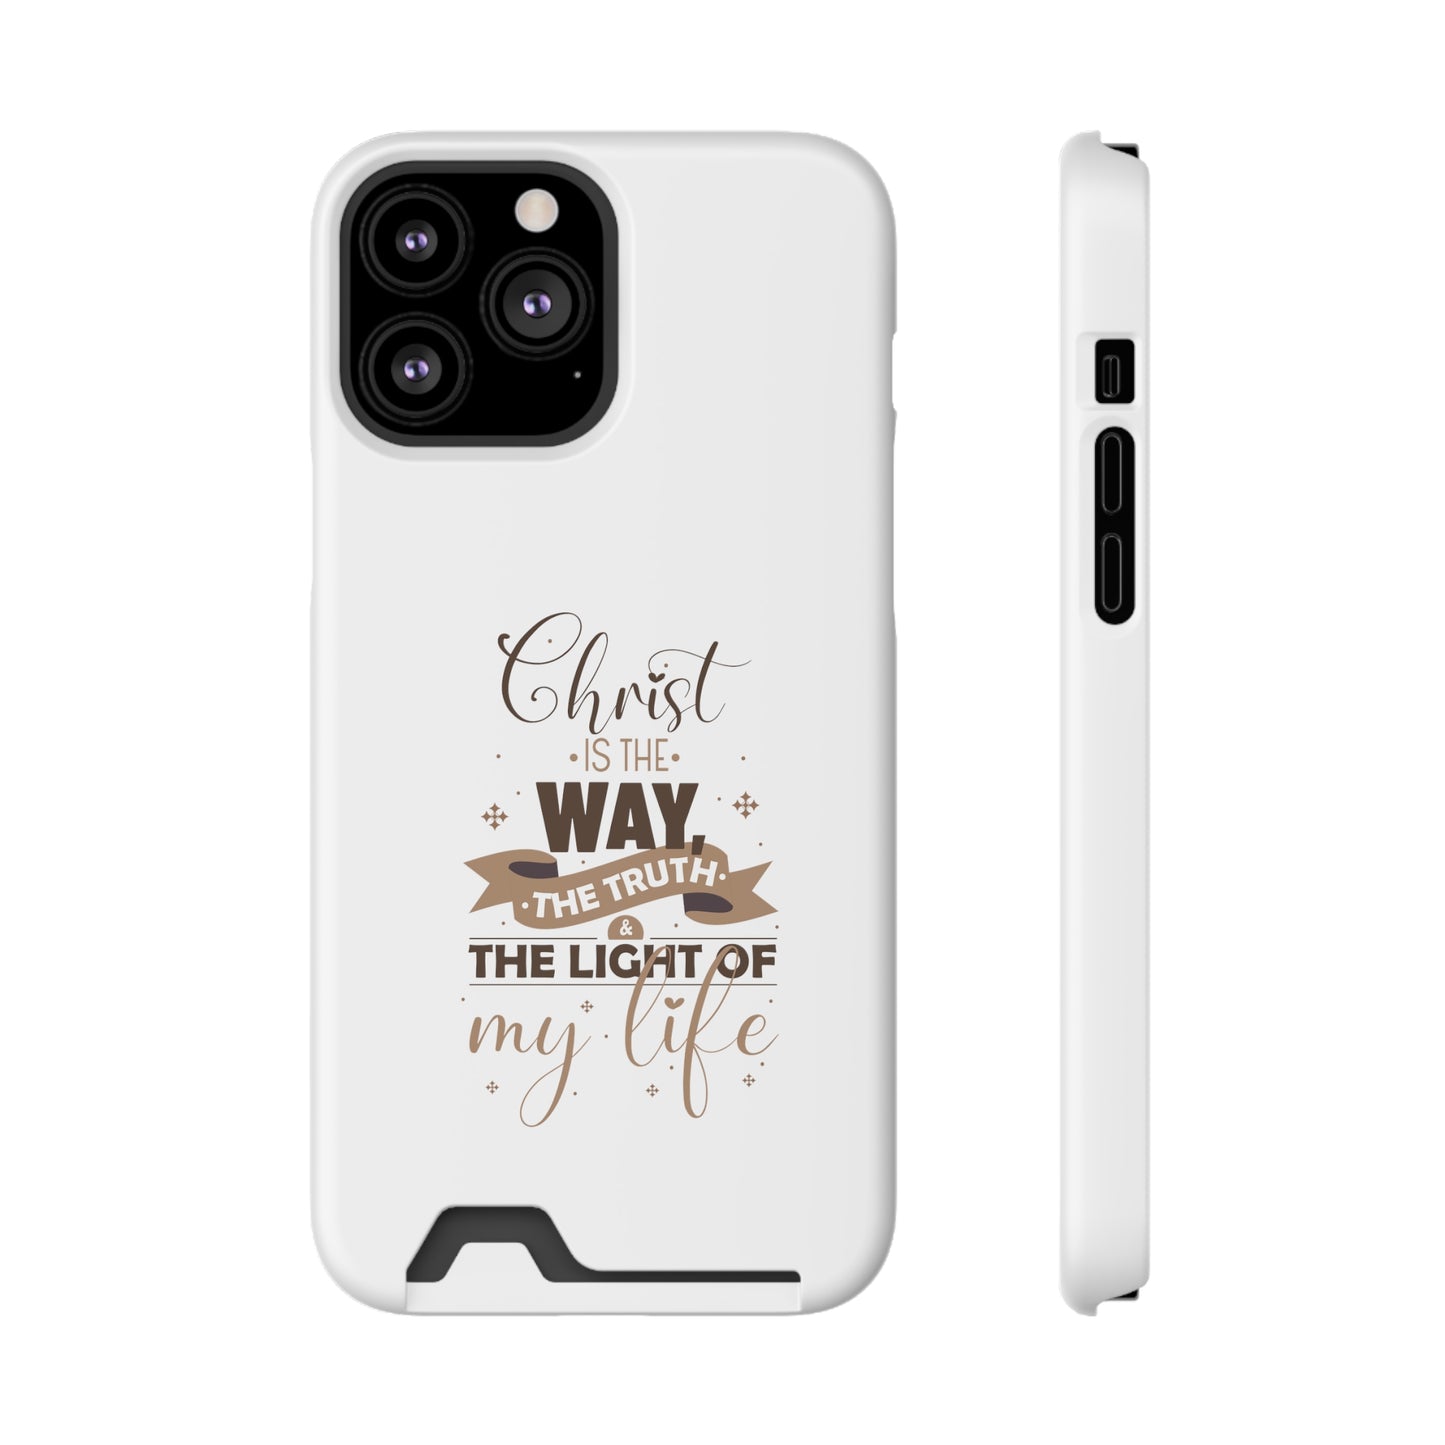 Christ Is The Way, The Truth, & The Light Of My Life Phone Case With Card Holder